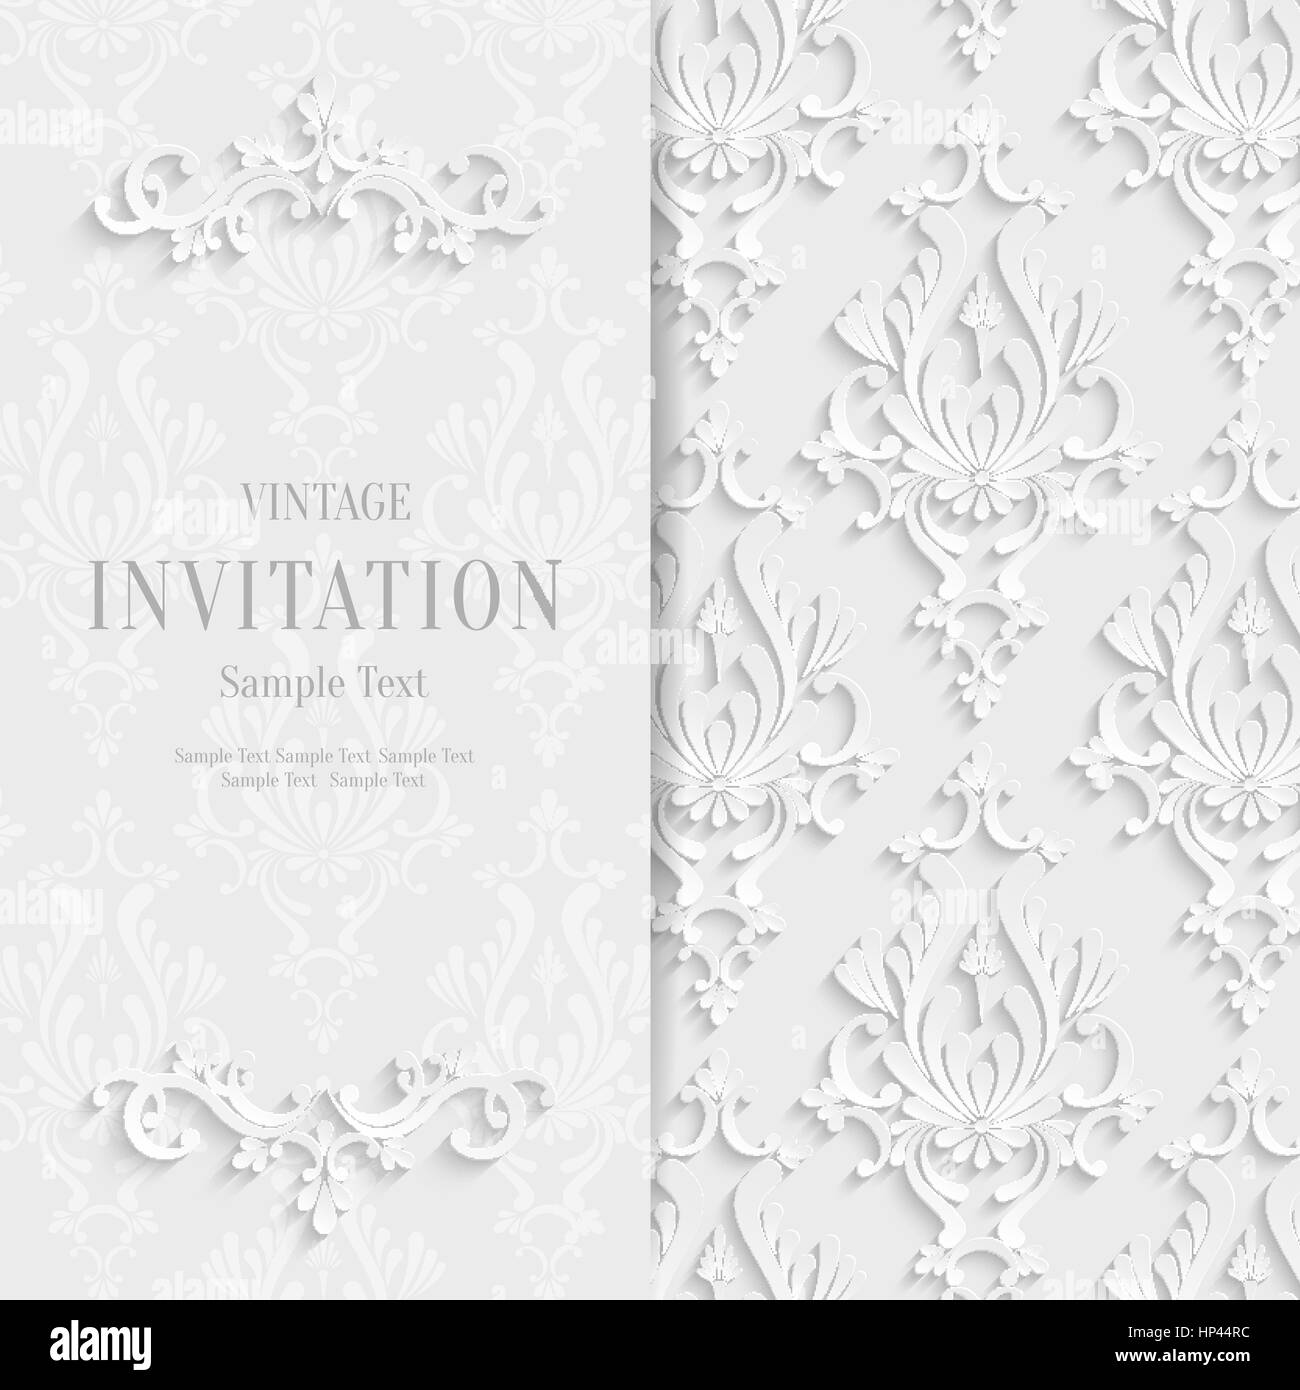 Vector White Floral 3d Christmas and Invitation Background Template Stock Vector